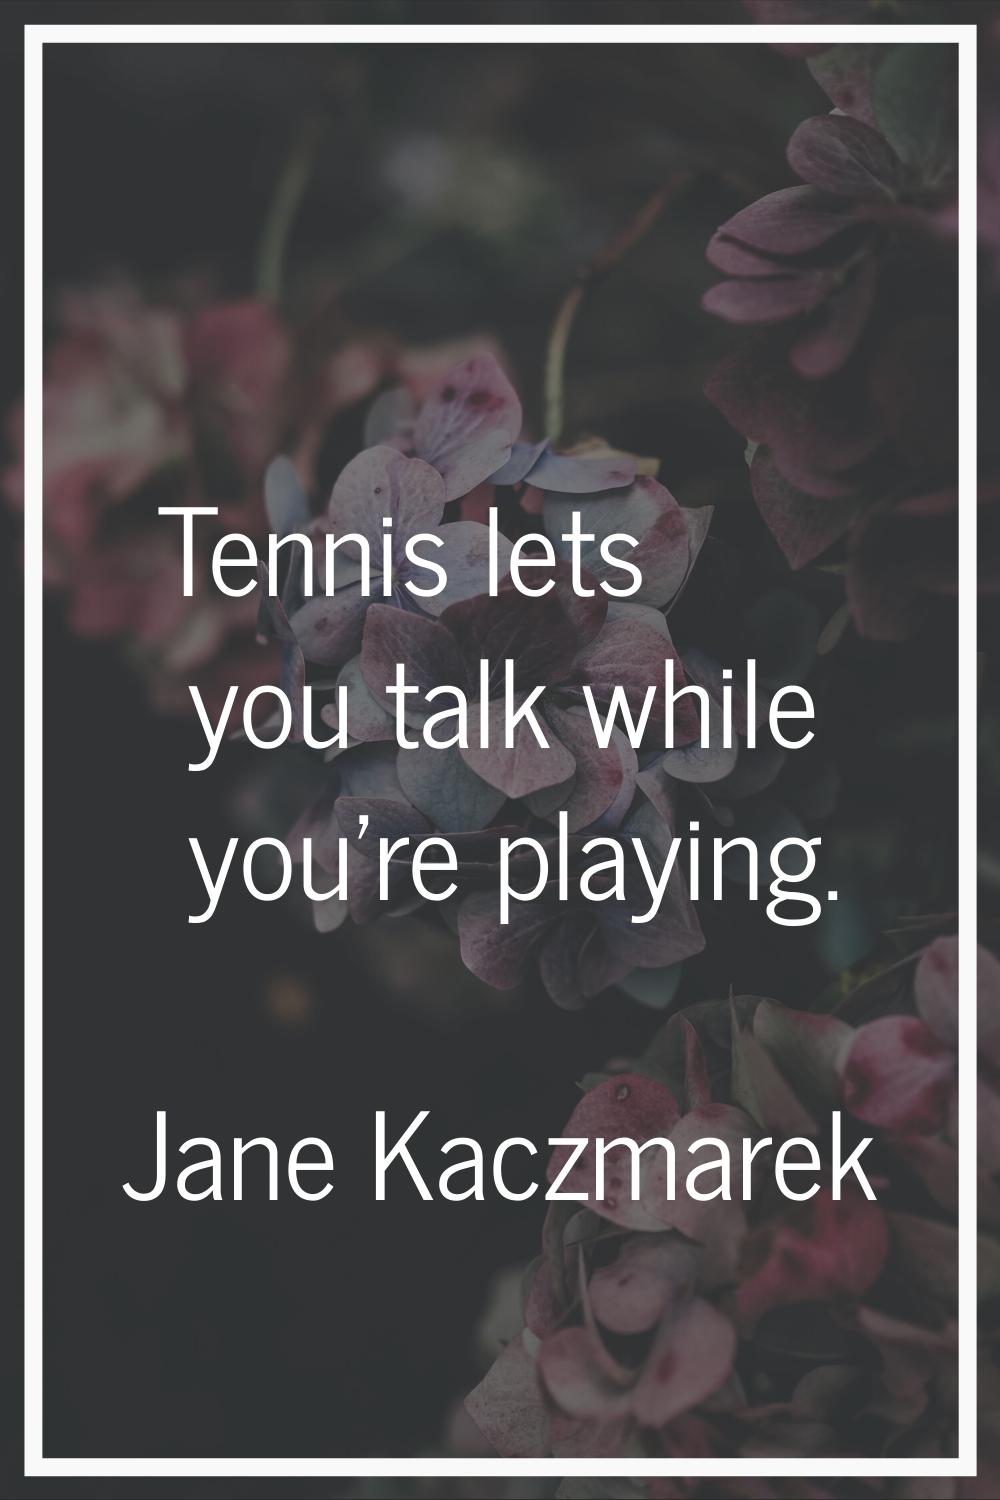 Tennis lets you talk while you're playing.